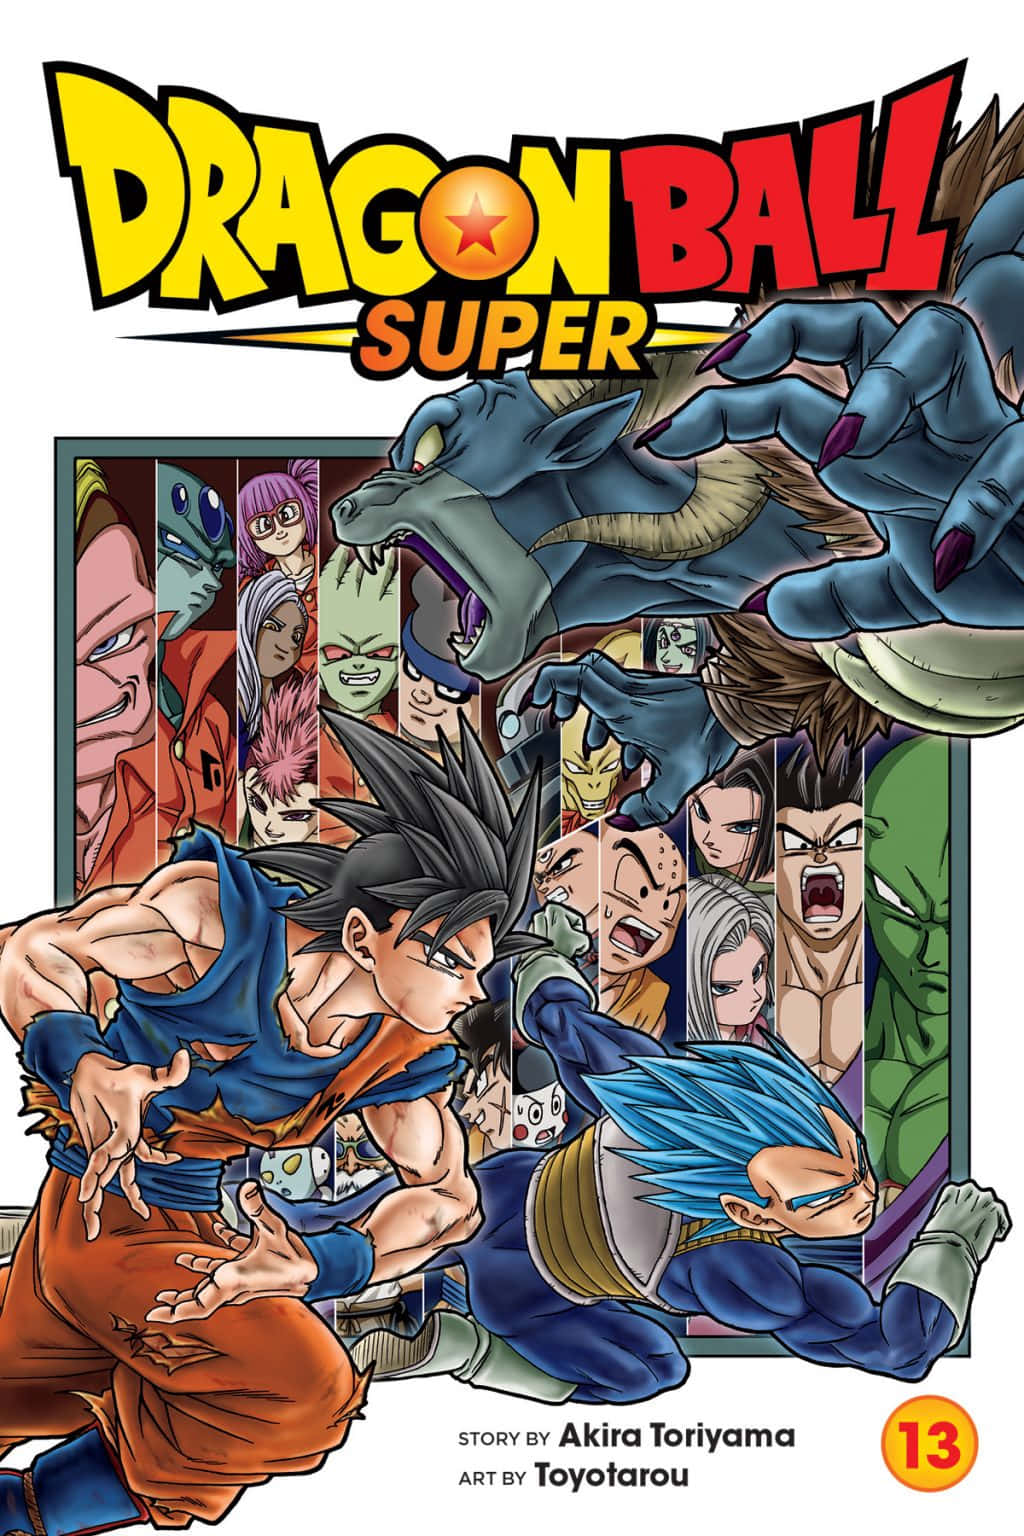 Follow the Epic Adventure of Goku and his Friends in the Dragon Ball Super Manga Wallpaper